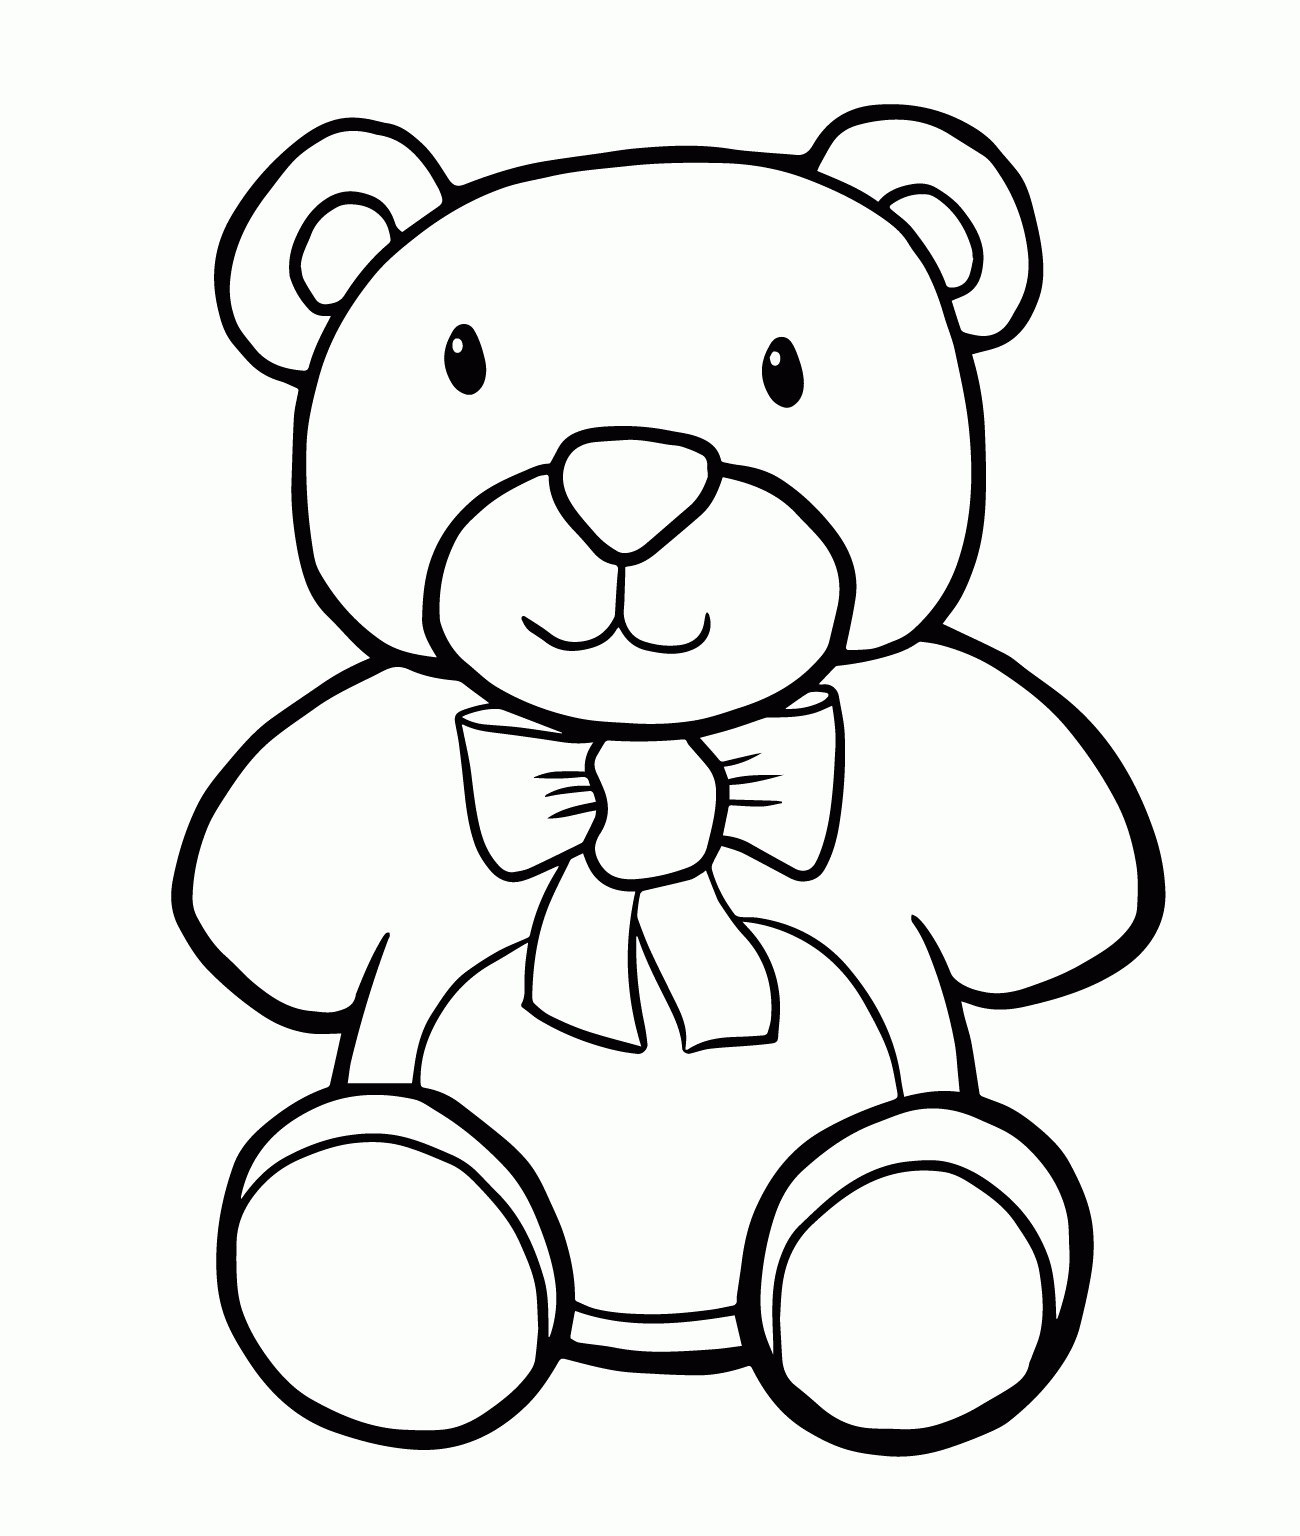 Free Coloring Pages Teddy Bear, Download Free Coloring Pages Teddy Bear